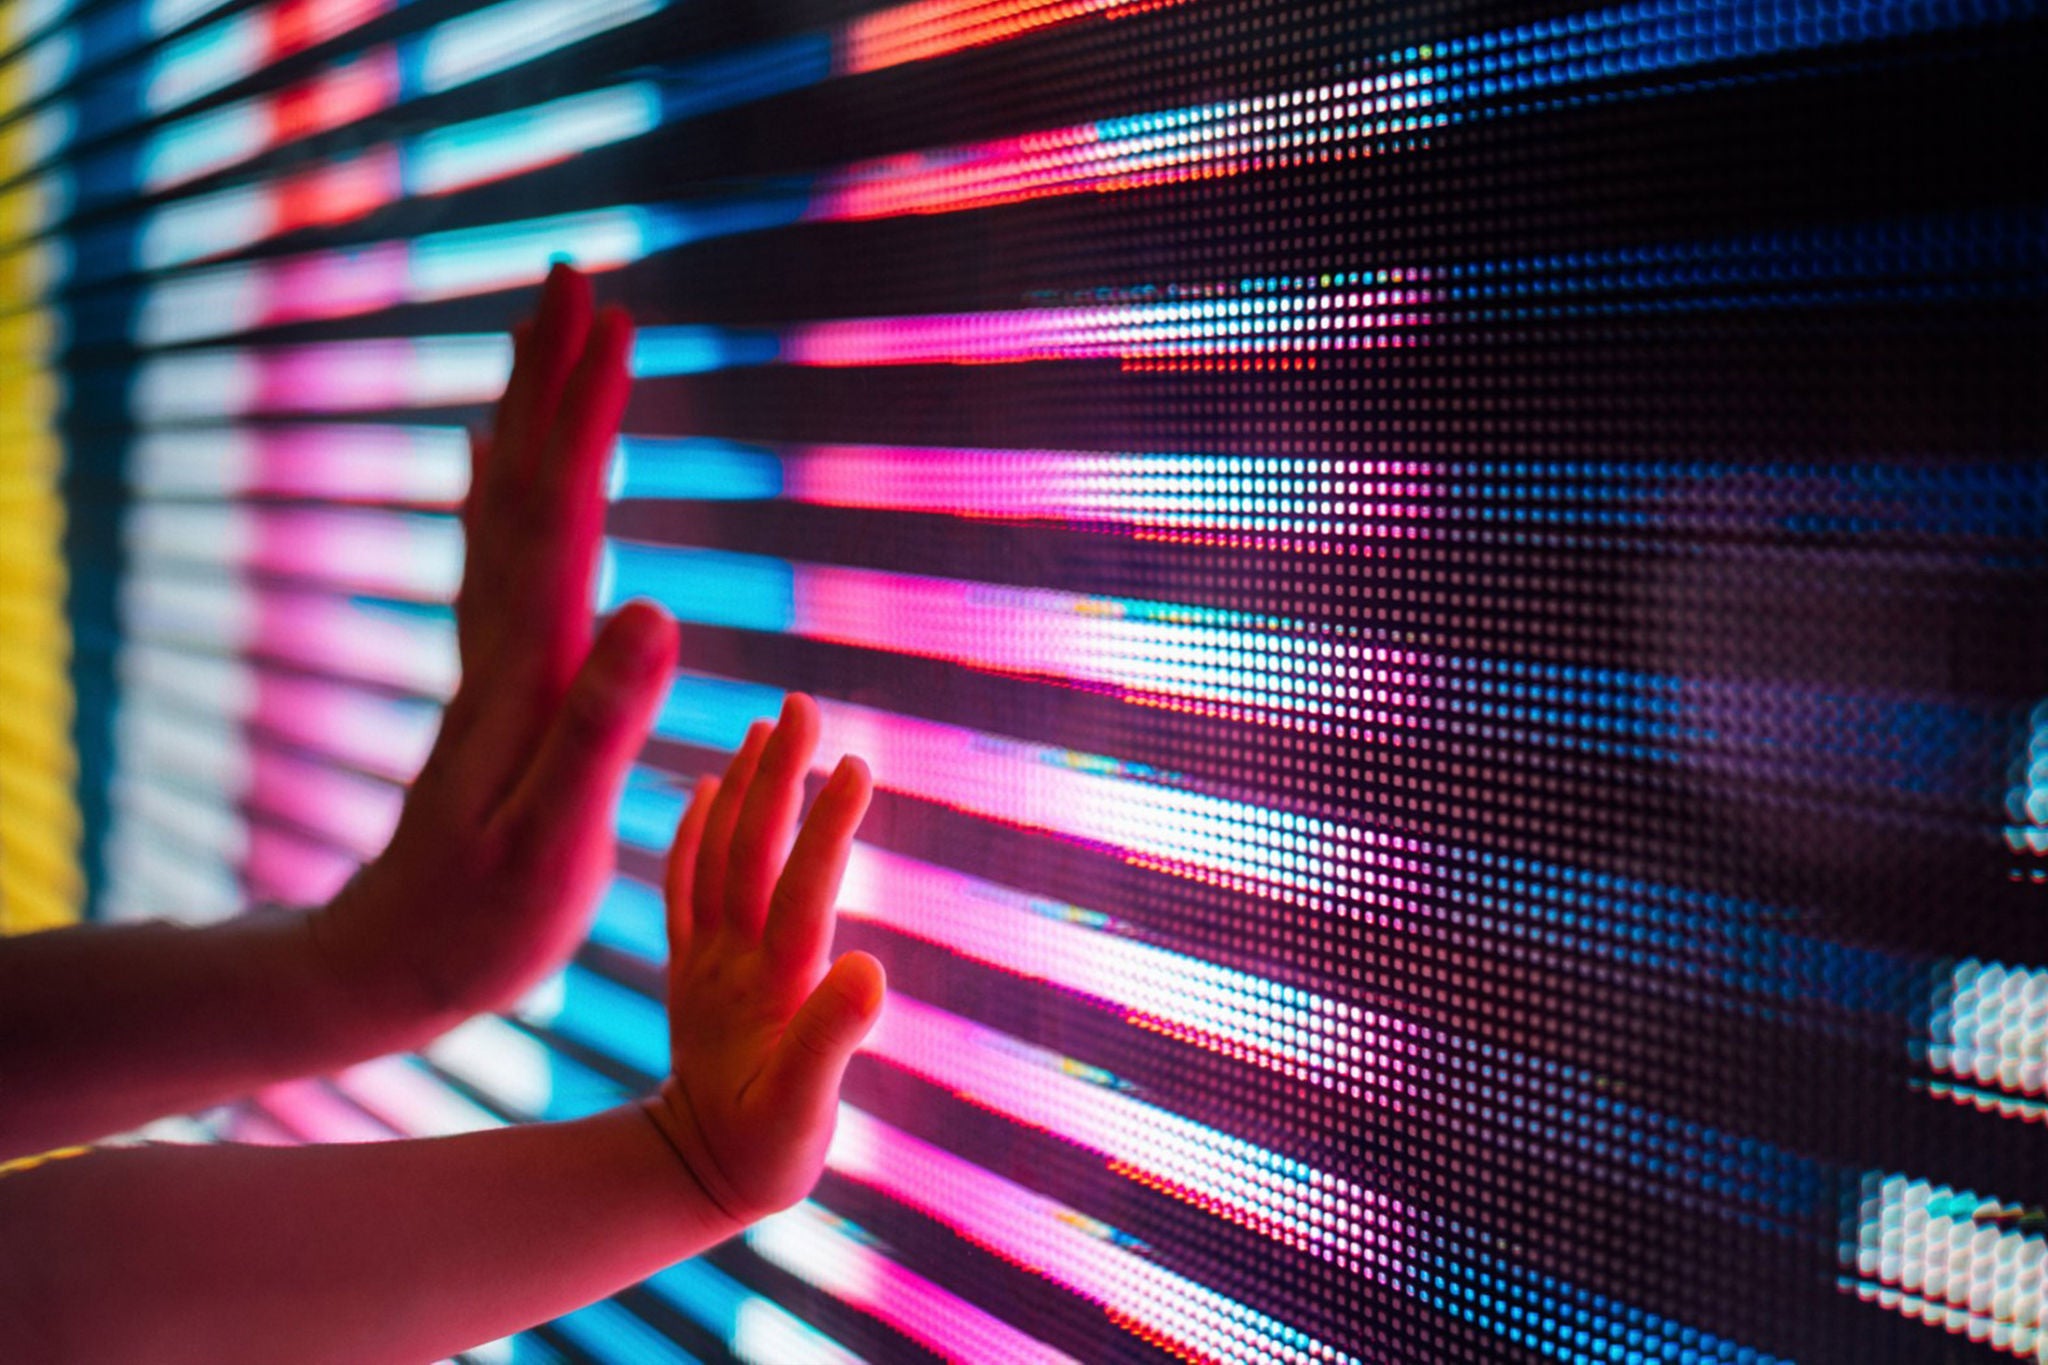 Close up of a mother and kids hand touching illuminated coloured led display screen